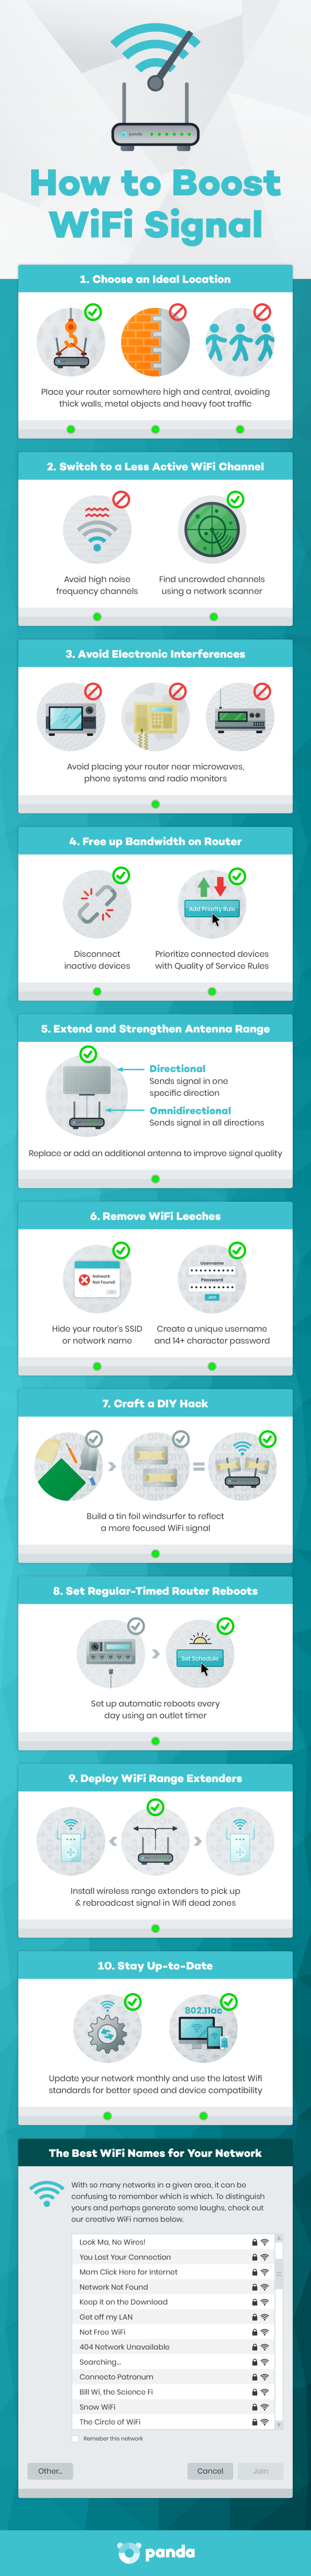 How-to-boost-wifi-signal